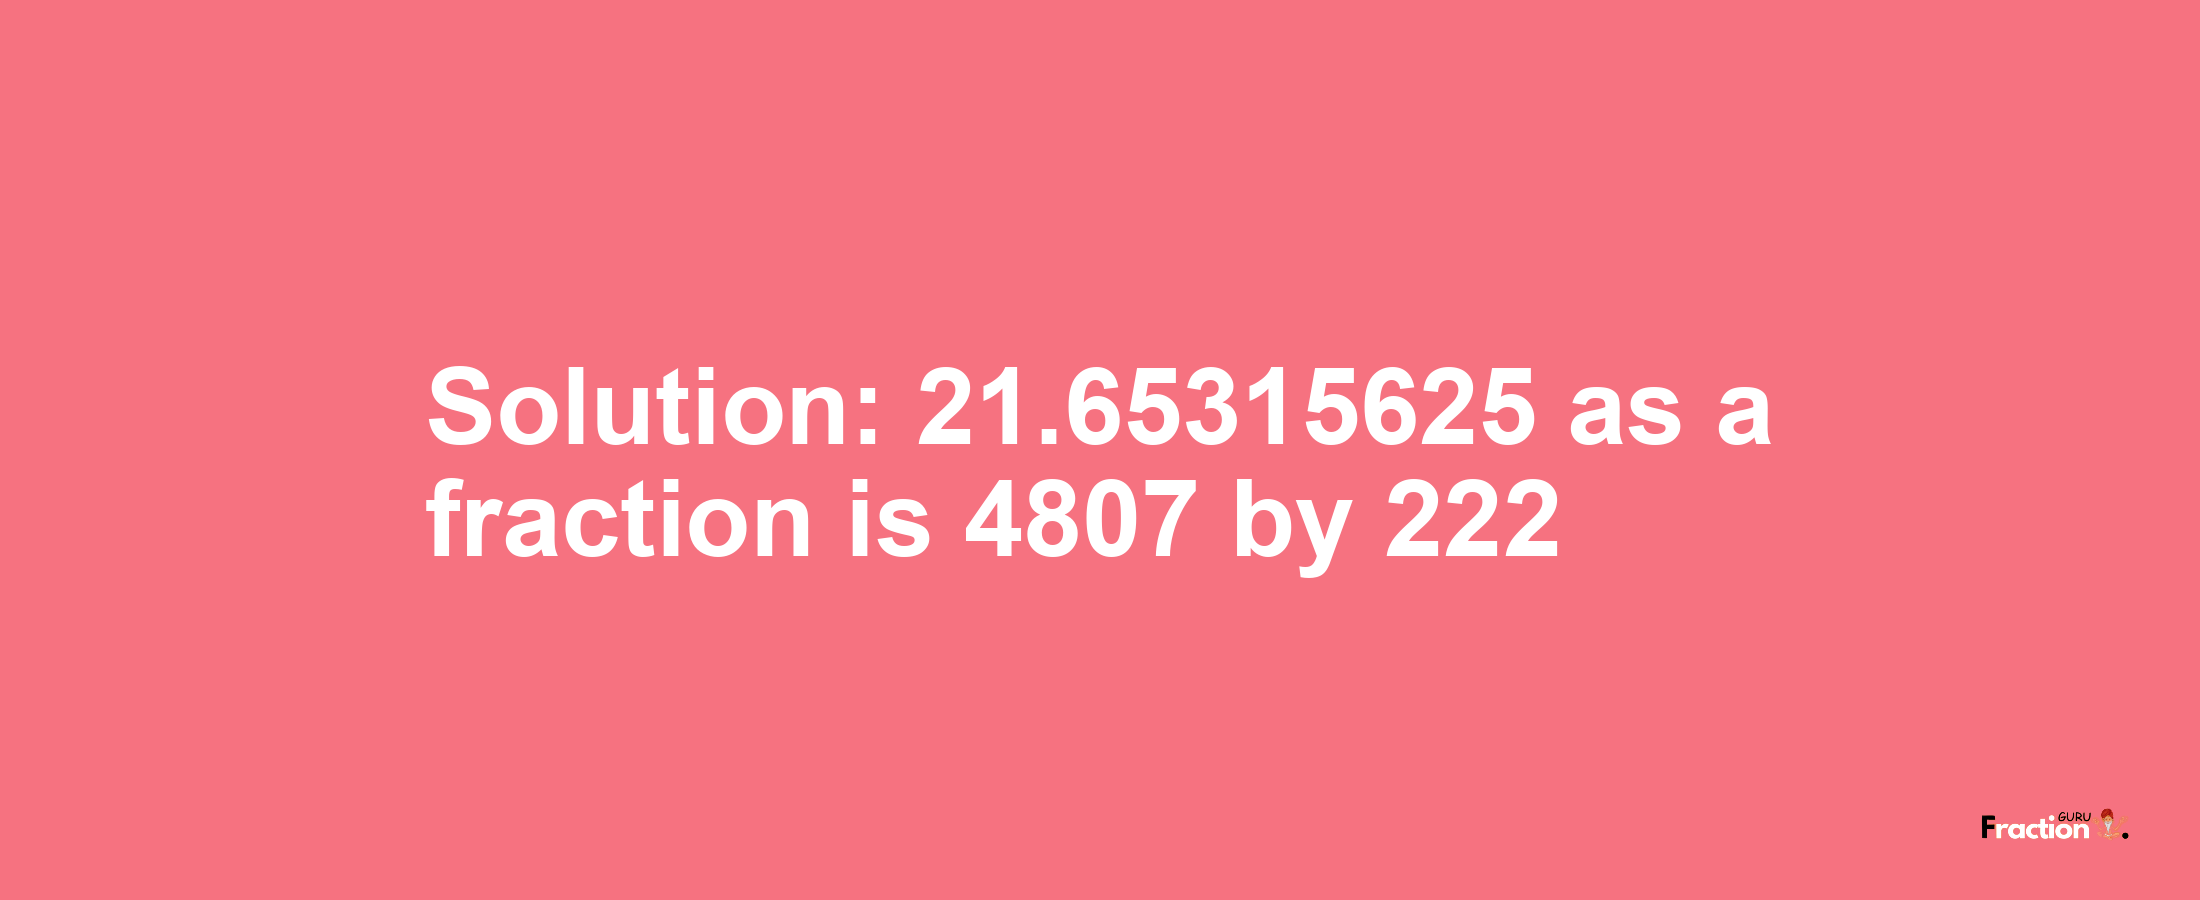 Solution:21.65315625 as a fraction is 4807/222